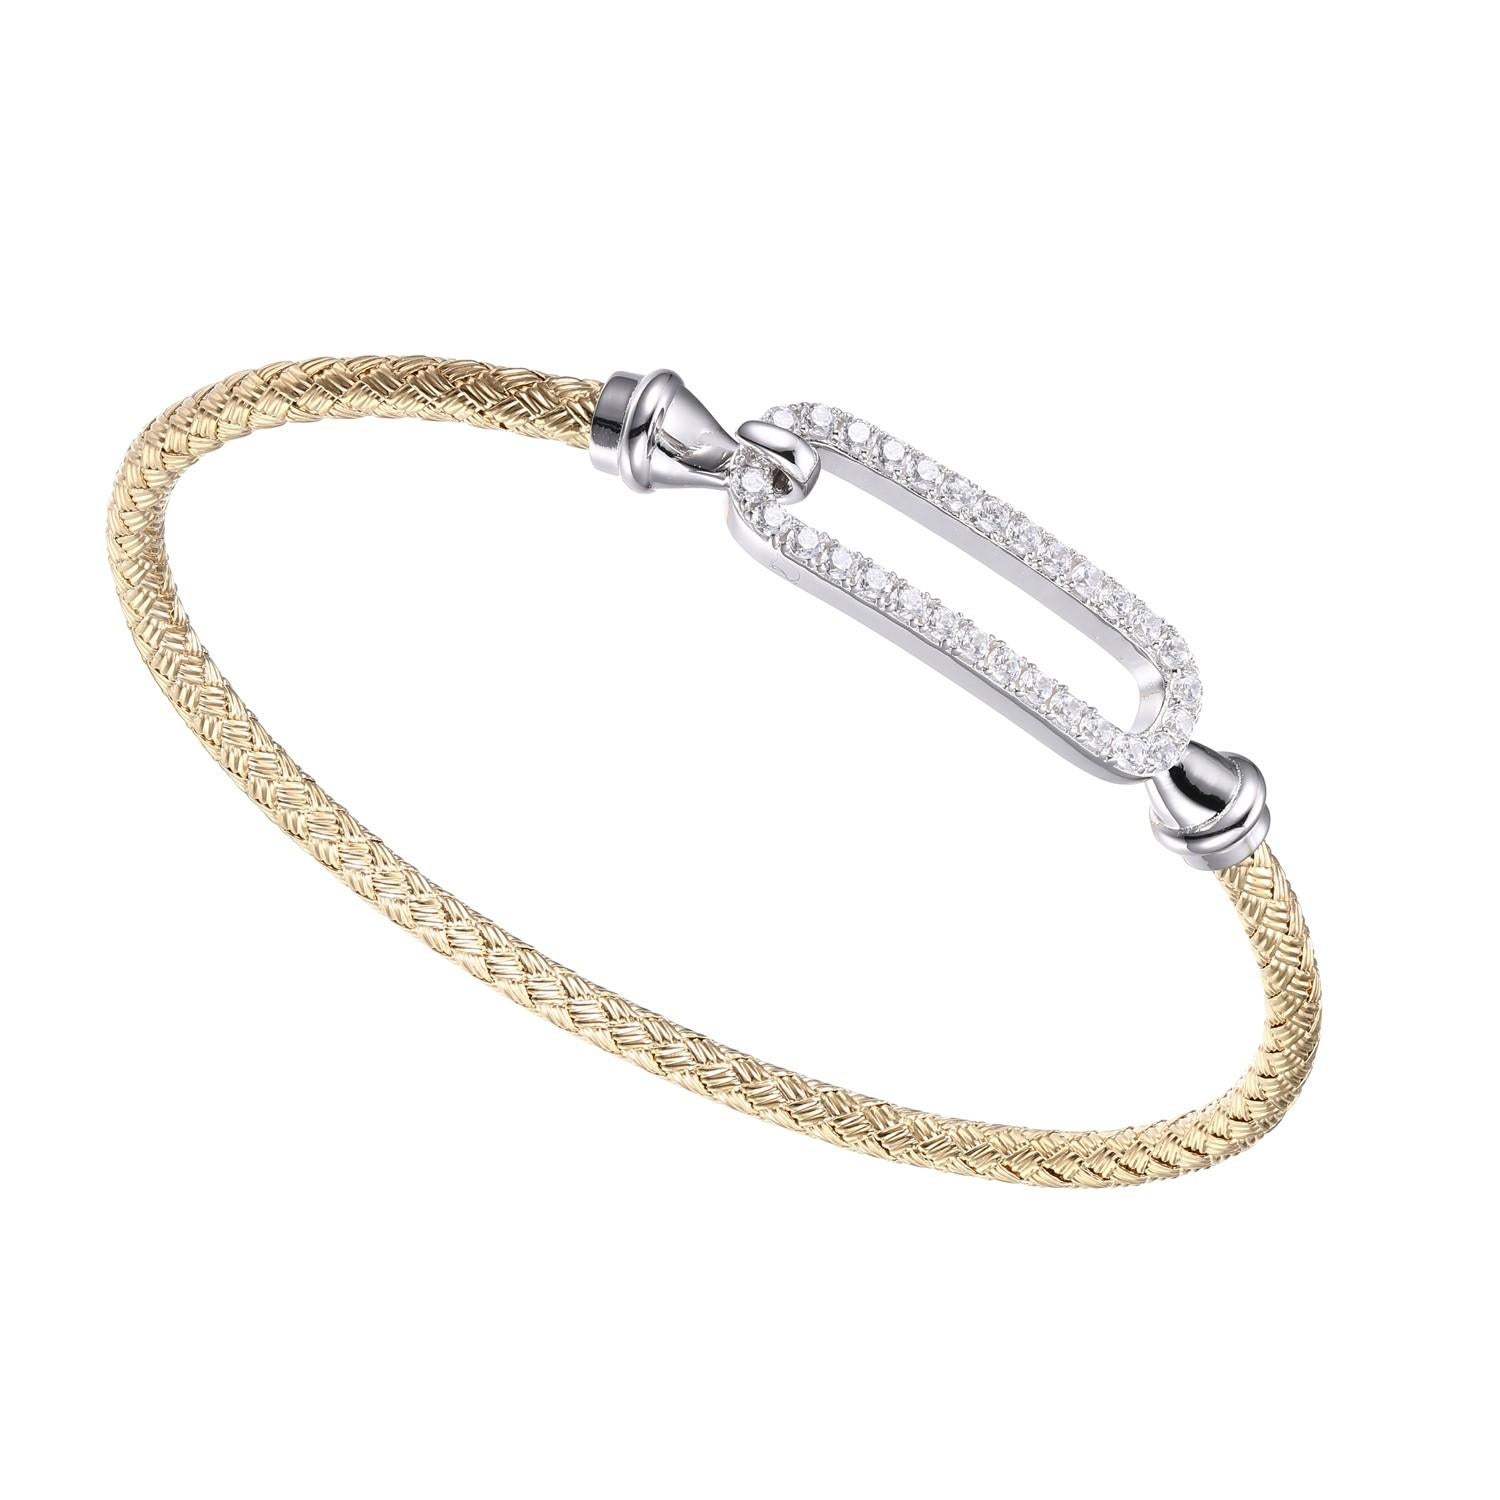 Sterling Silver 3mm Mesh Hook Bangle with CZ Link (24x8mm) in Center, 2 Tone, 18K Yellow Gold and Rhodium Finish